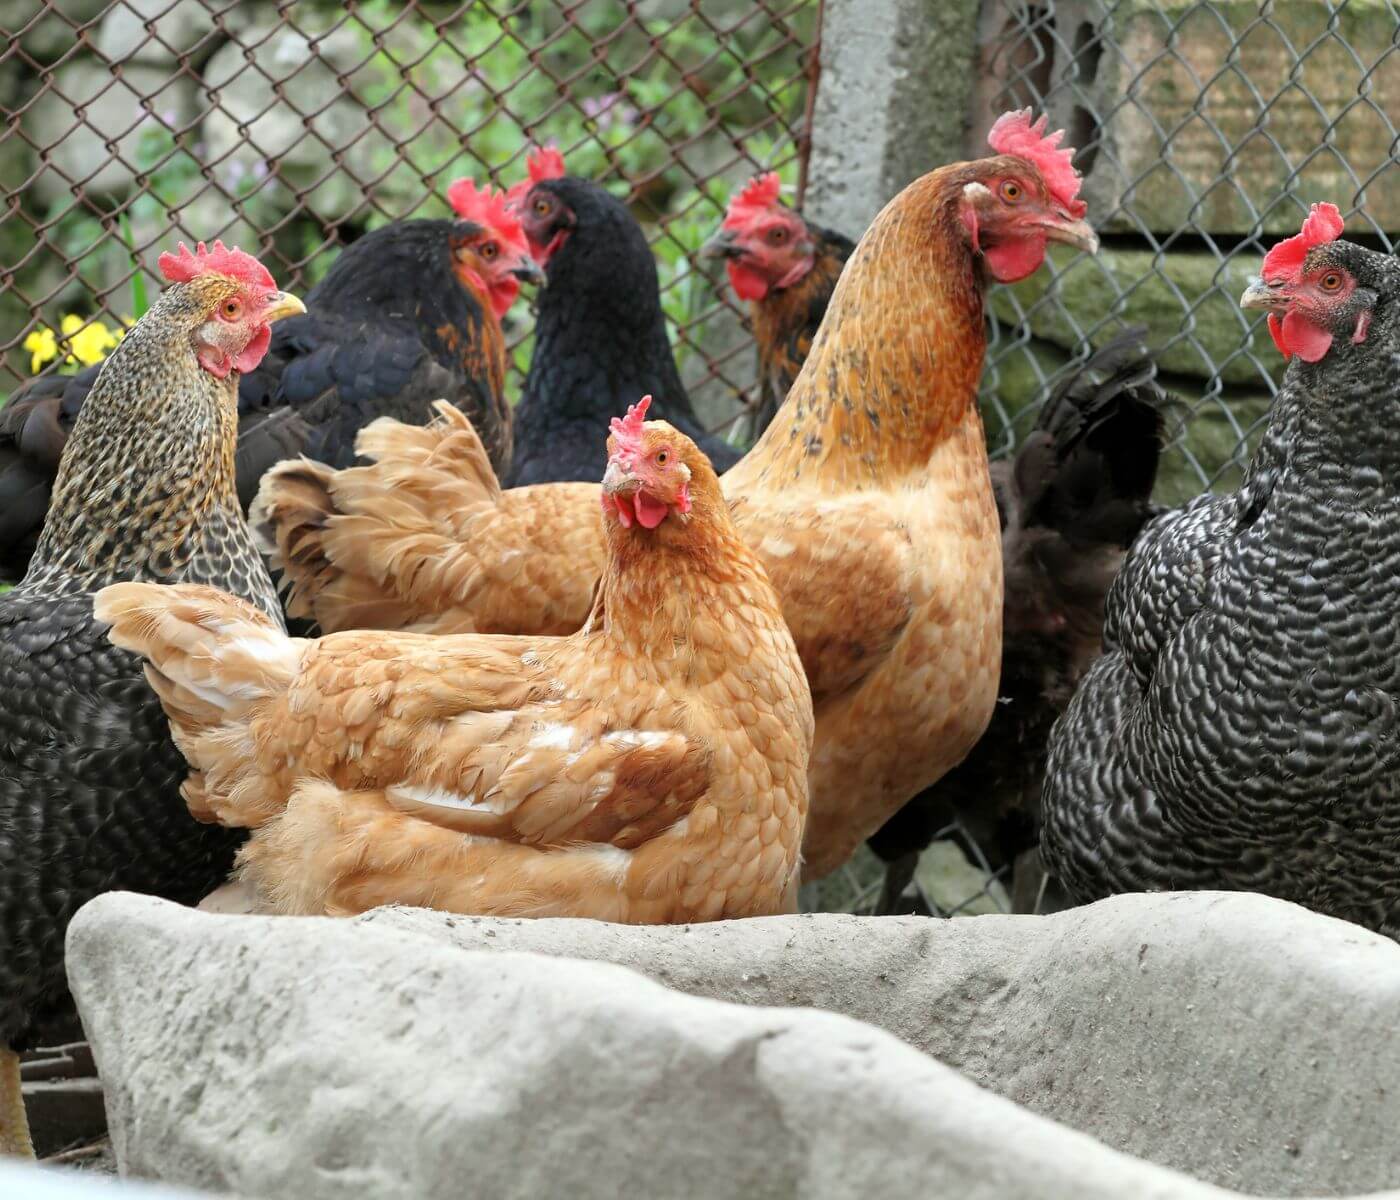 Slow-growing broiler breeders: How to improve hatching egg quality?